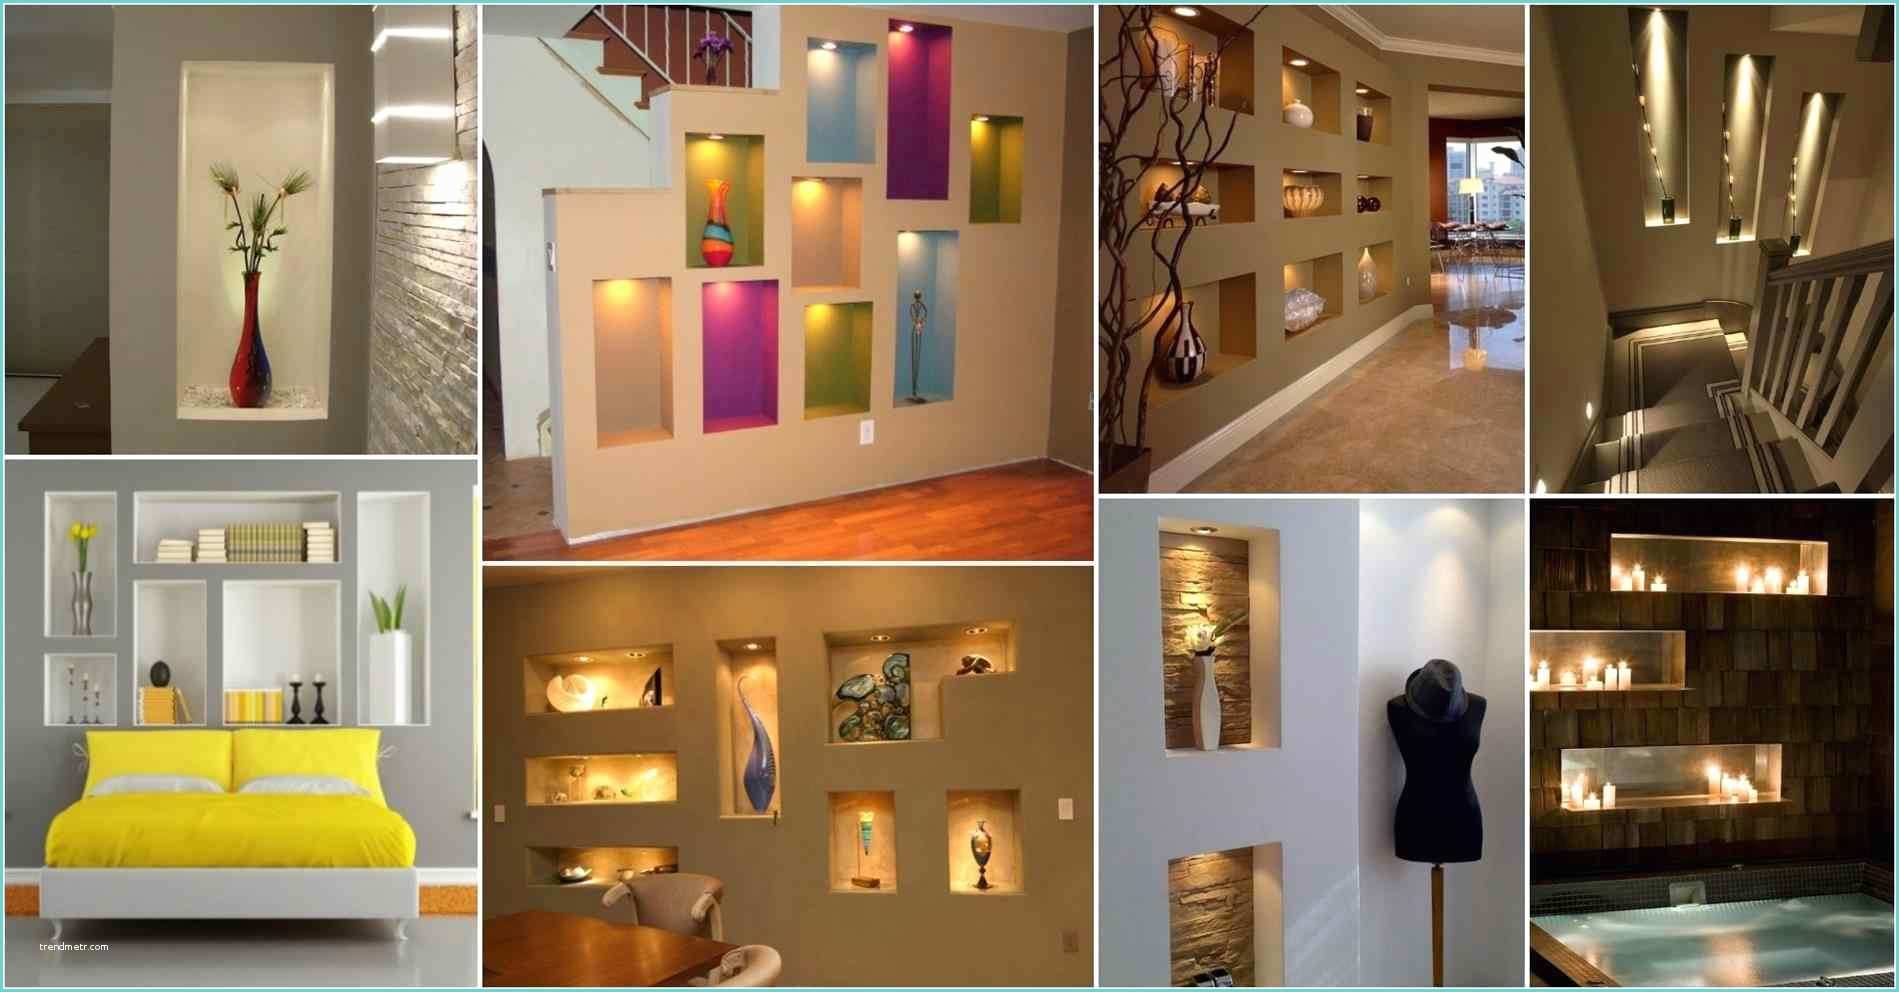 Recessed Wall Niche Decorating Ideas Living Room Wall Niche Designs Recessed Decorating Ideas